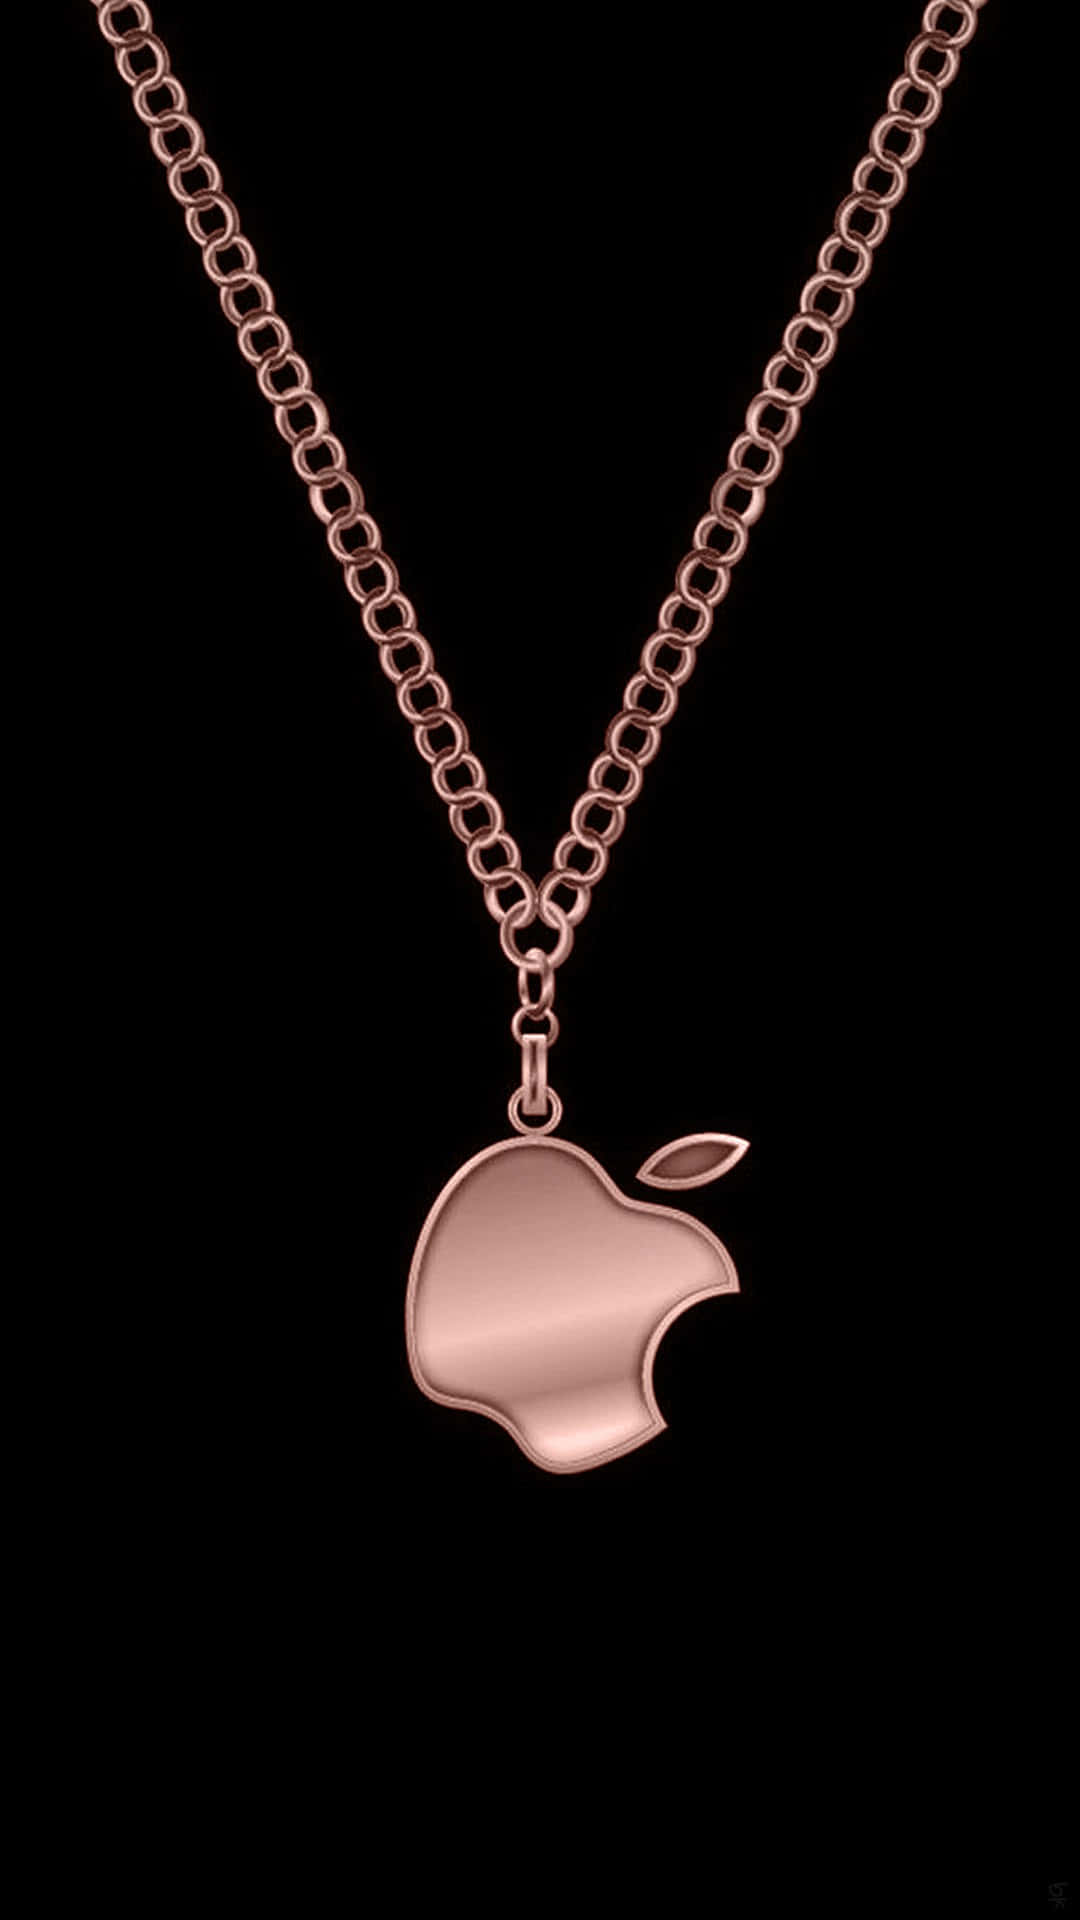 Rose Gold Apple Chain Necklace Wallpaper